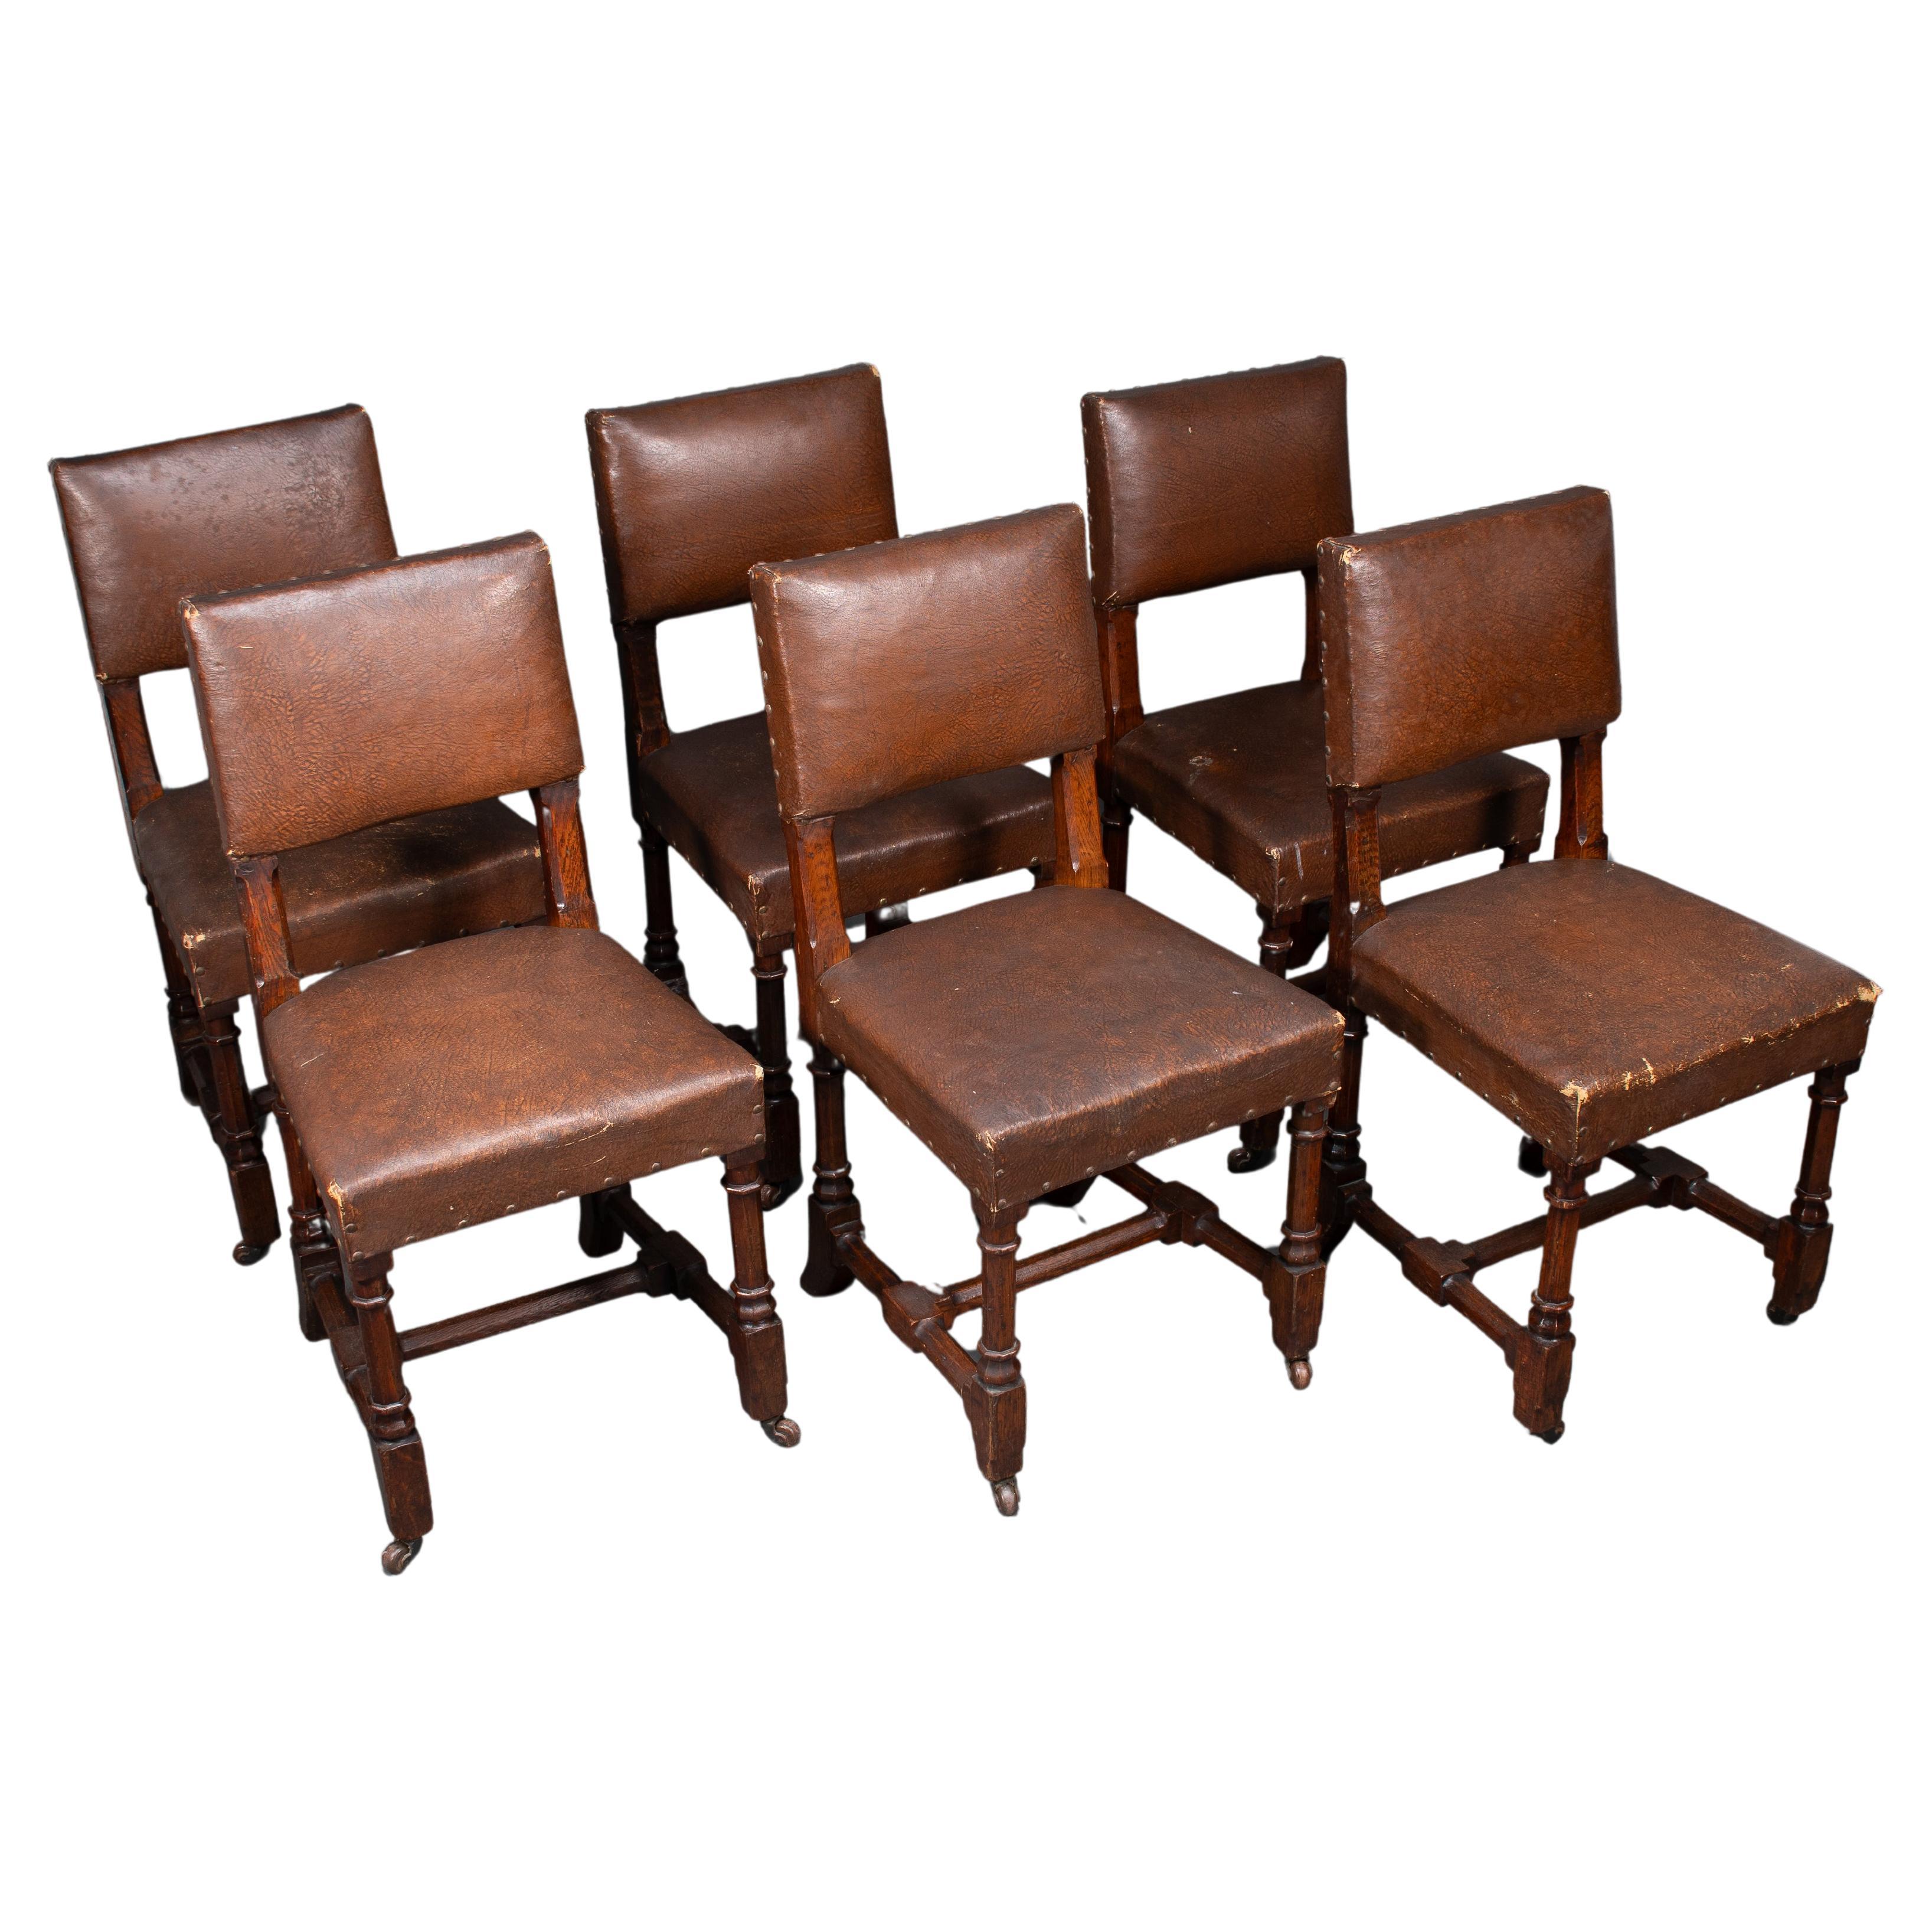 AWN Pugin, Six Gothic Revival Oak Dining Chairs Probably for the House of Lords